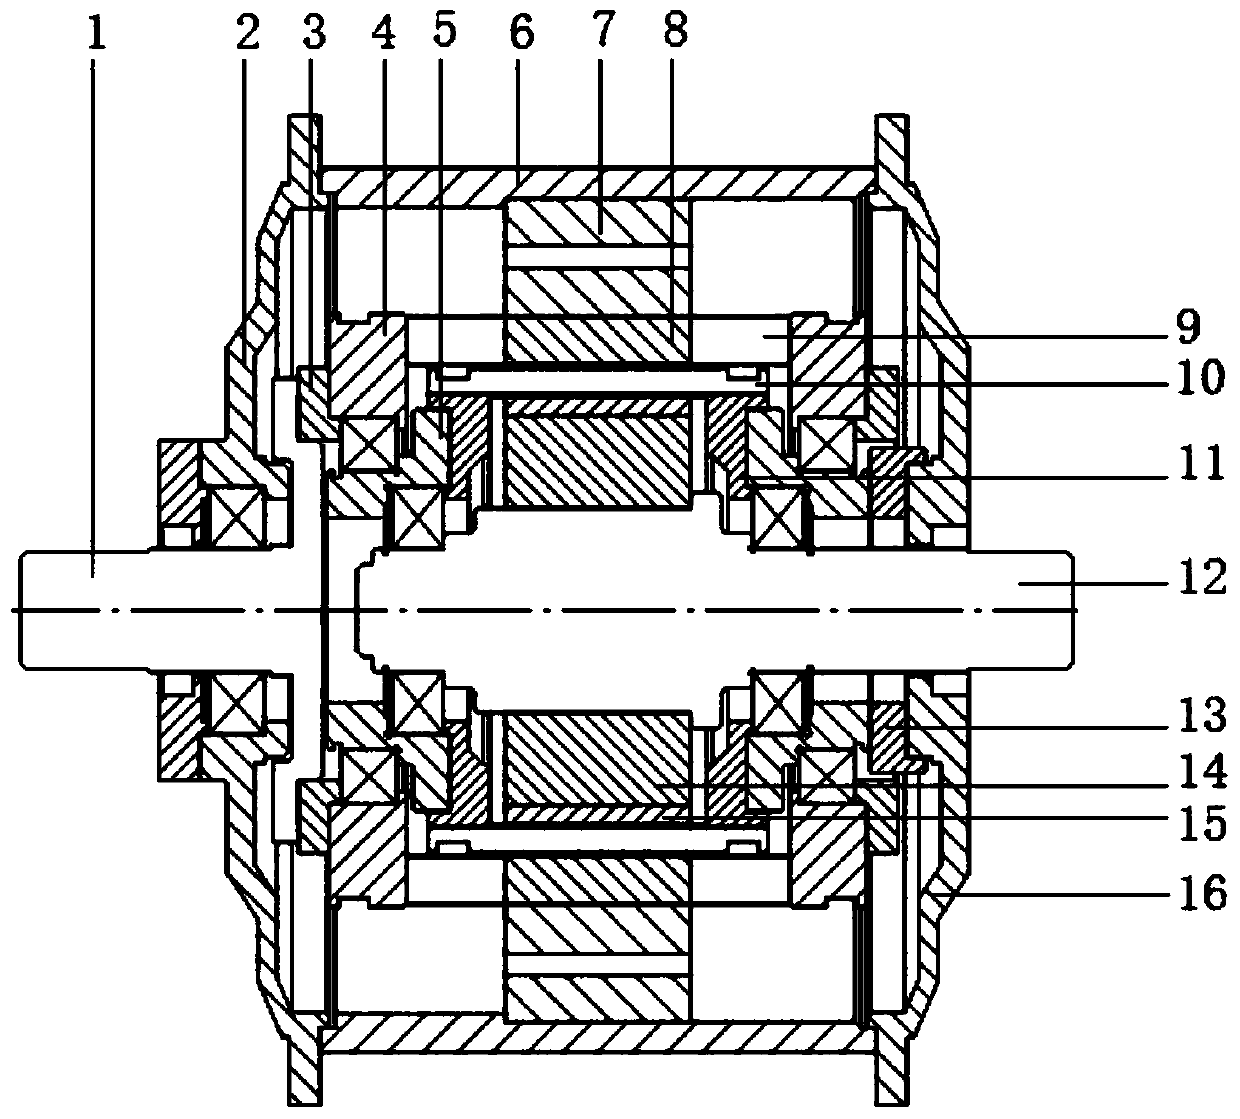 A magnetic coupling transmission device